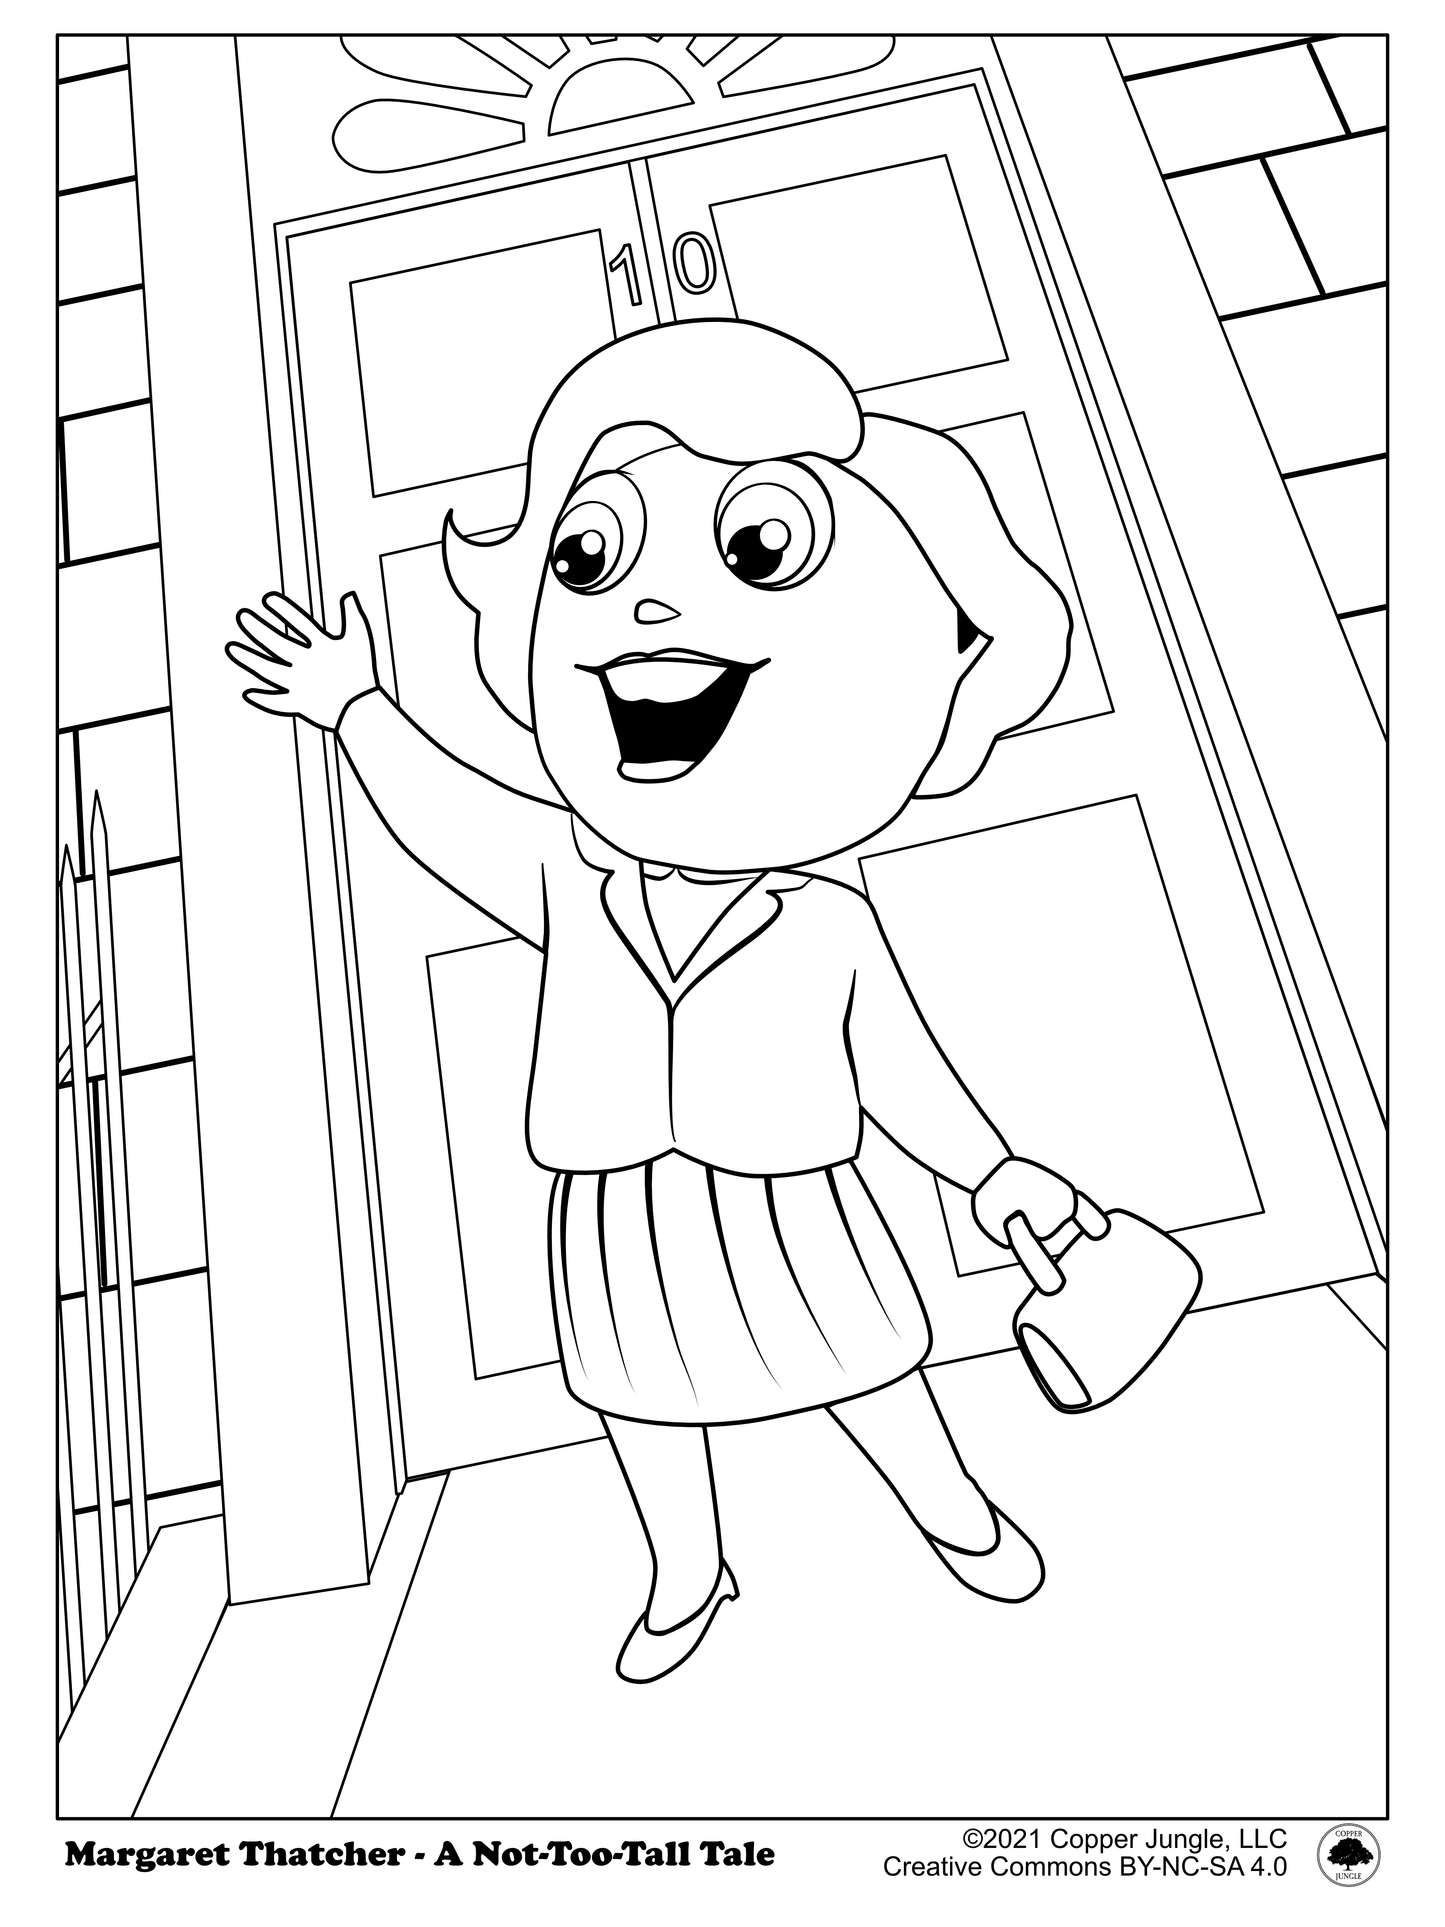 Margaret Thatcher on Downing Street Coloring Page